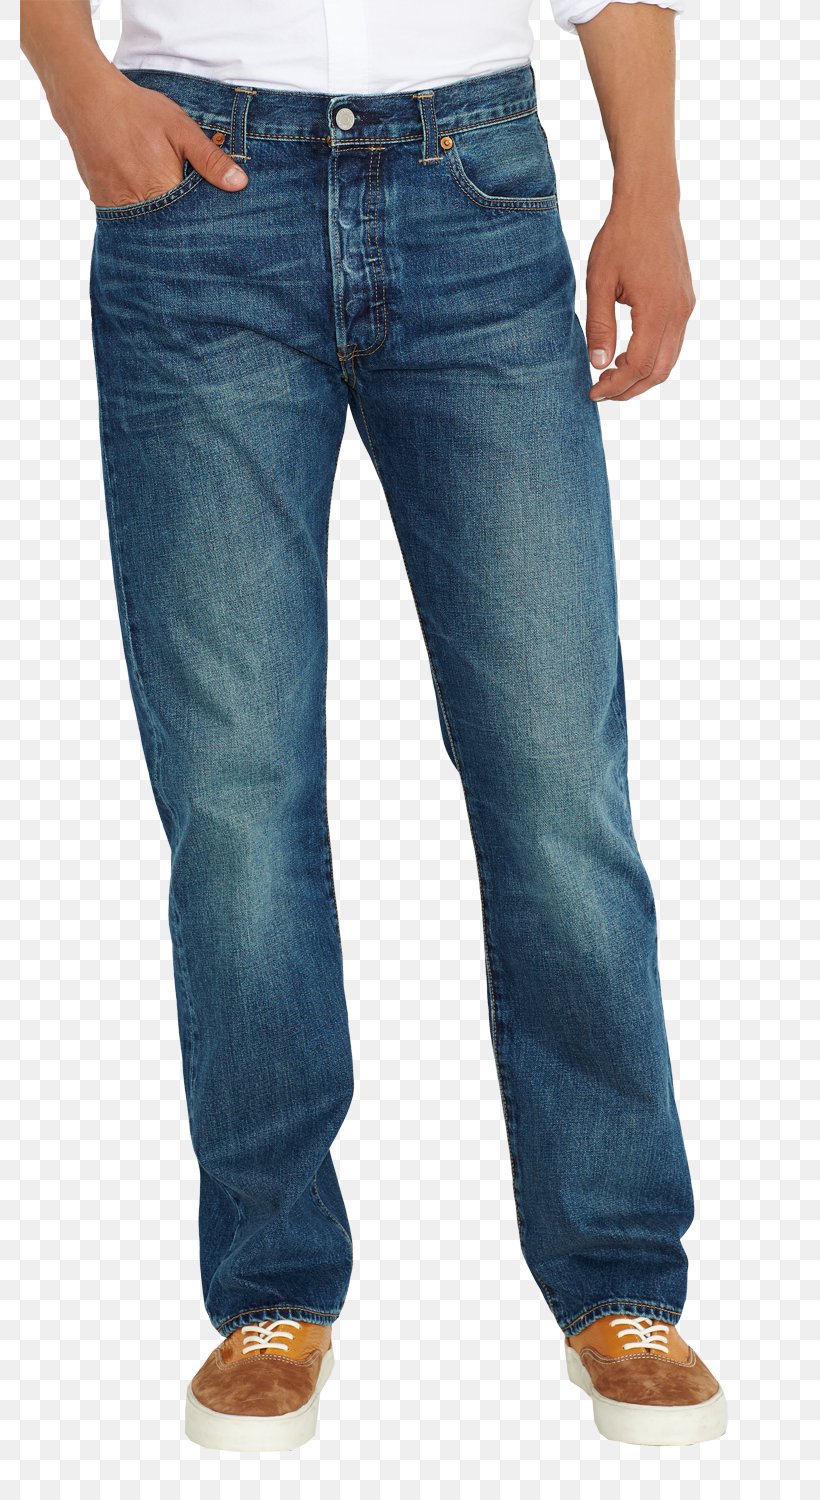 Levi's 501 Levi Strauss & Co. Jeans Slim-fit Pants Denim, PNG, 780x1500px, 7 For All Mankind, Levi Strauss Co, Blue, Carpenter Jeans, Chino Cloth Download Free